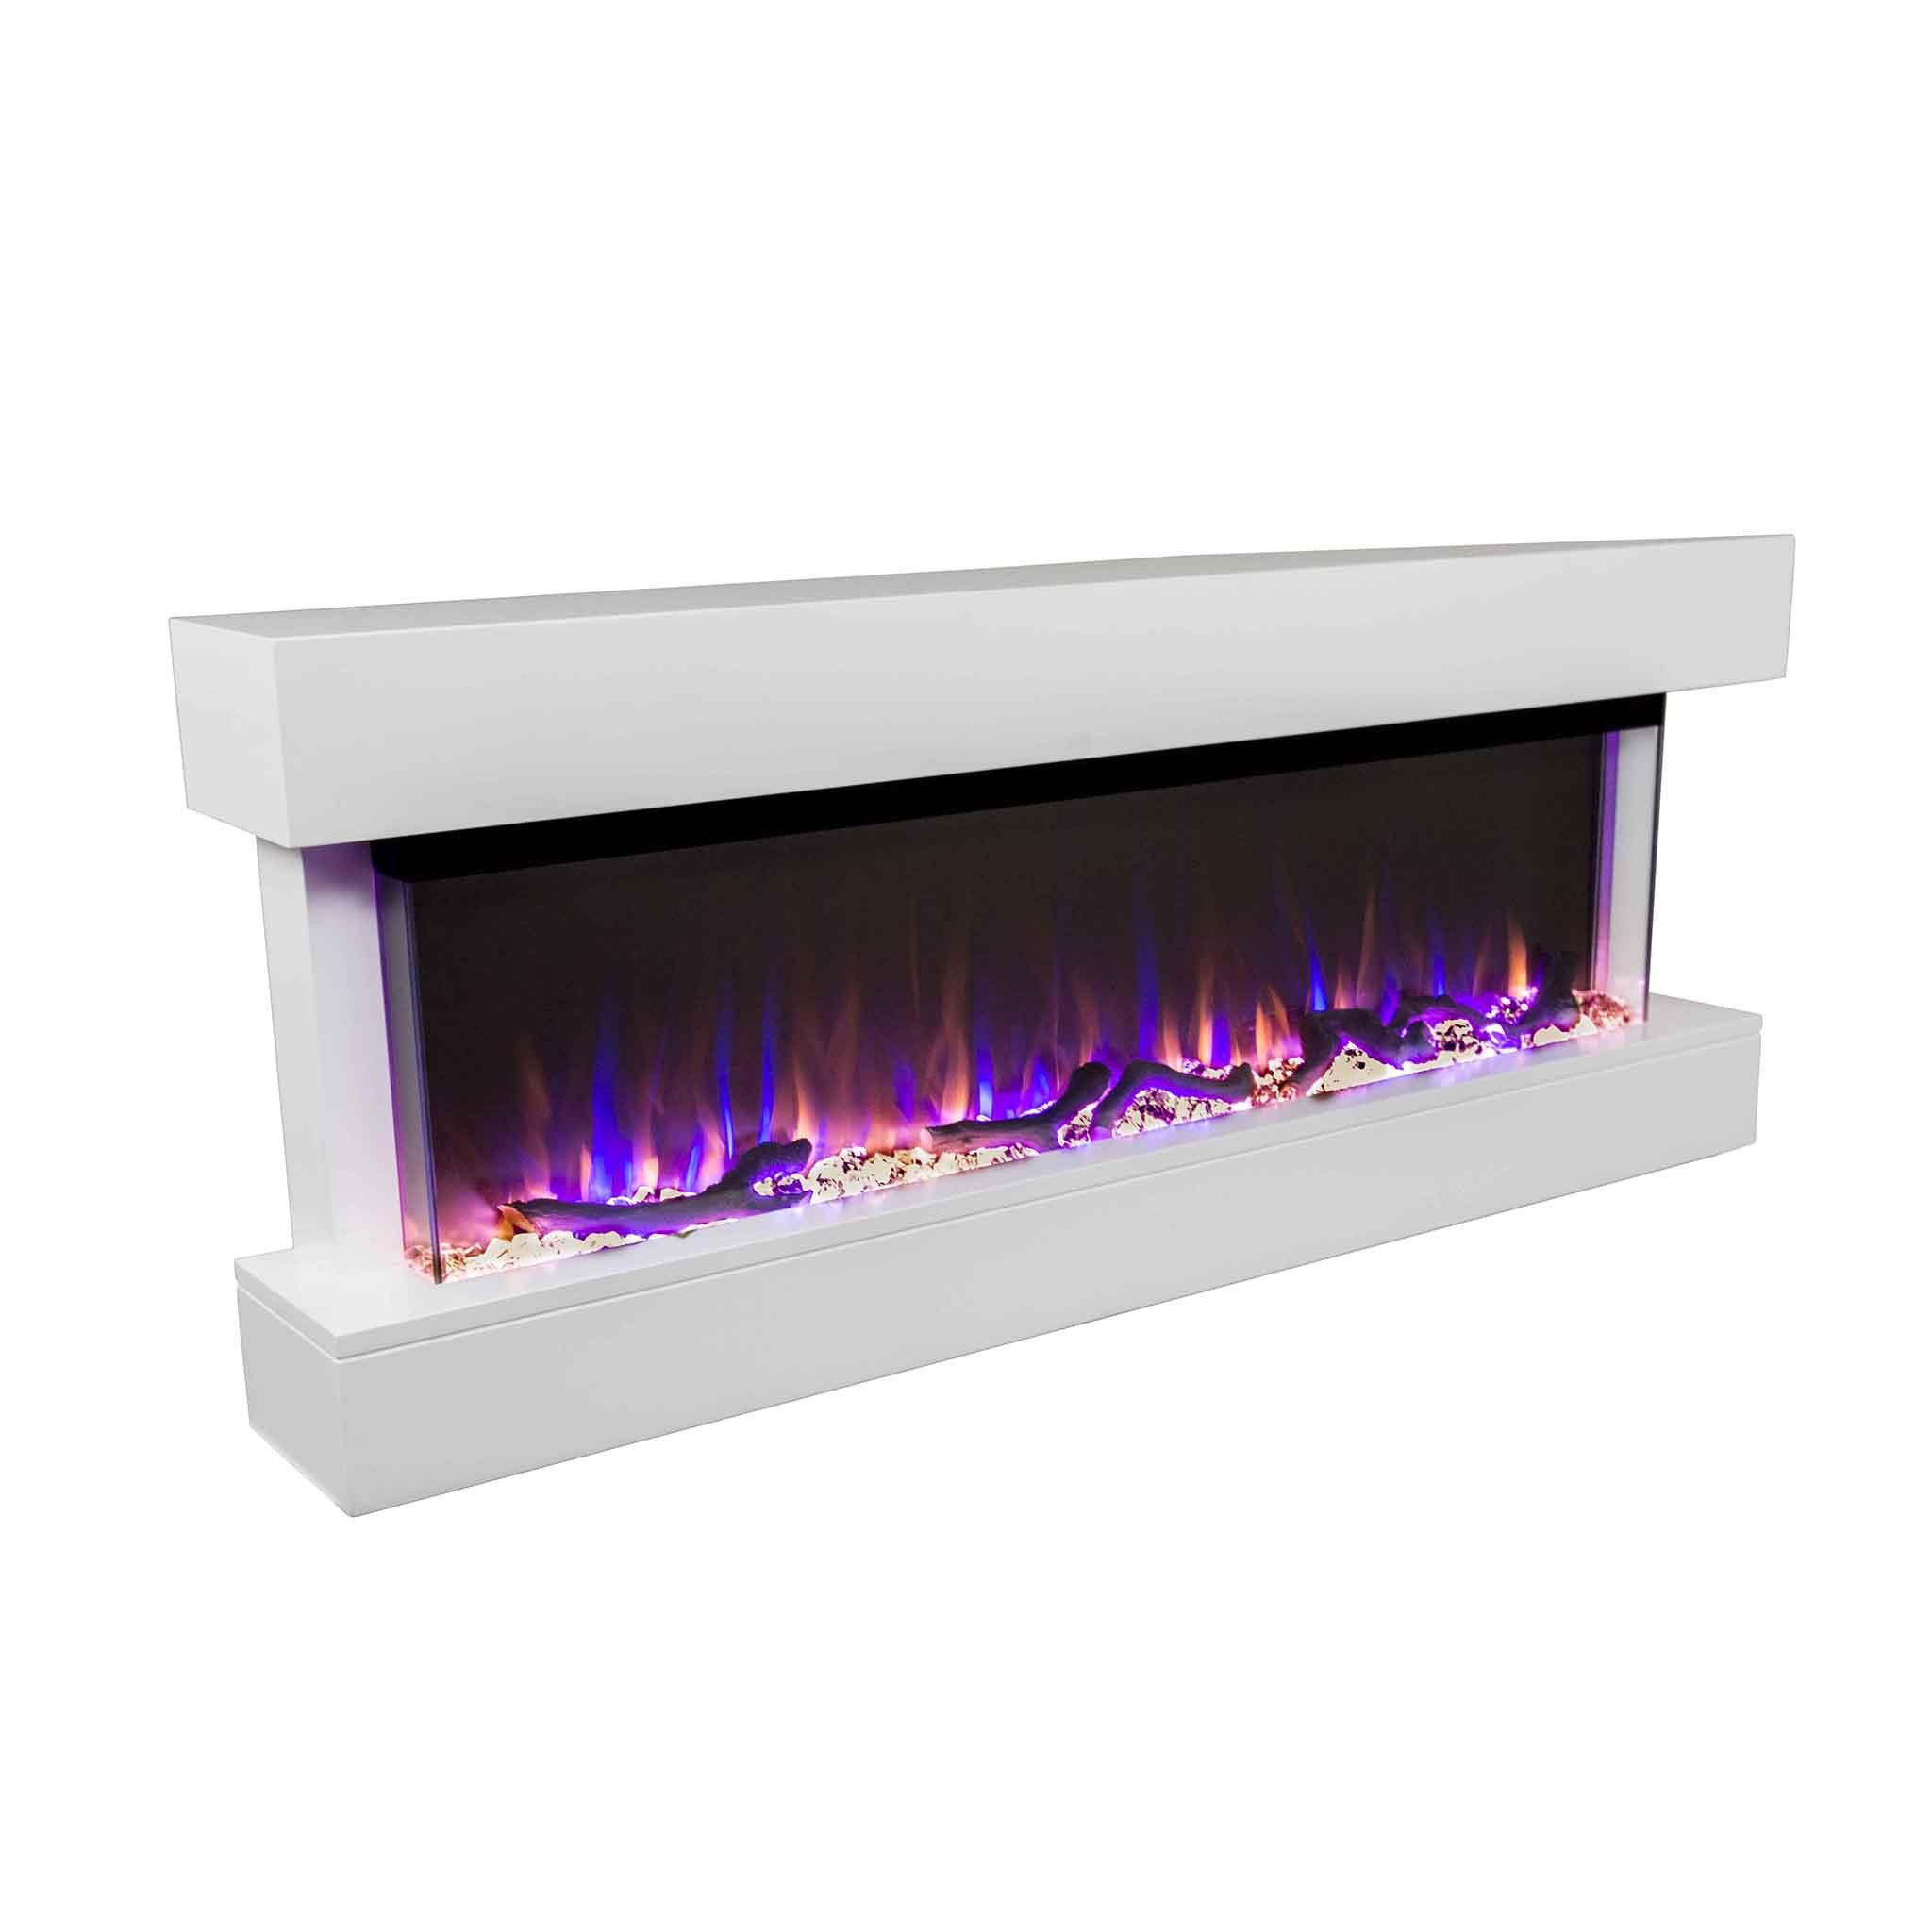 Touchstone Chesmont Wall Mount Electric Fireplace in white on angle